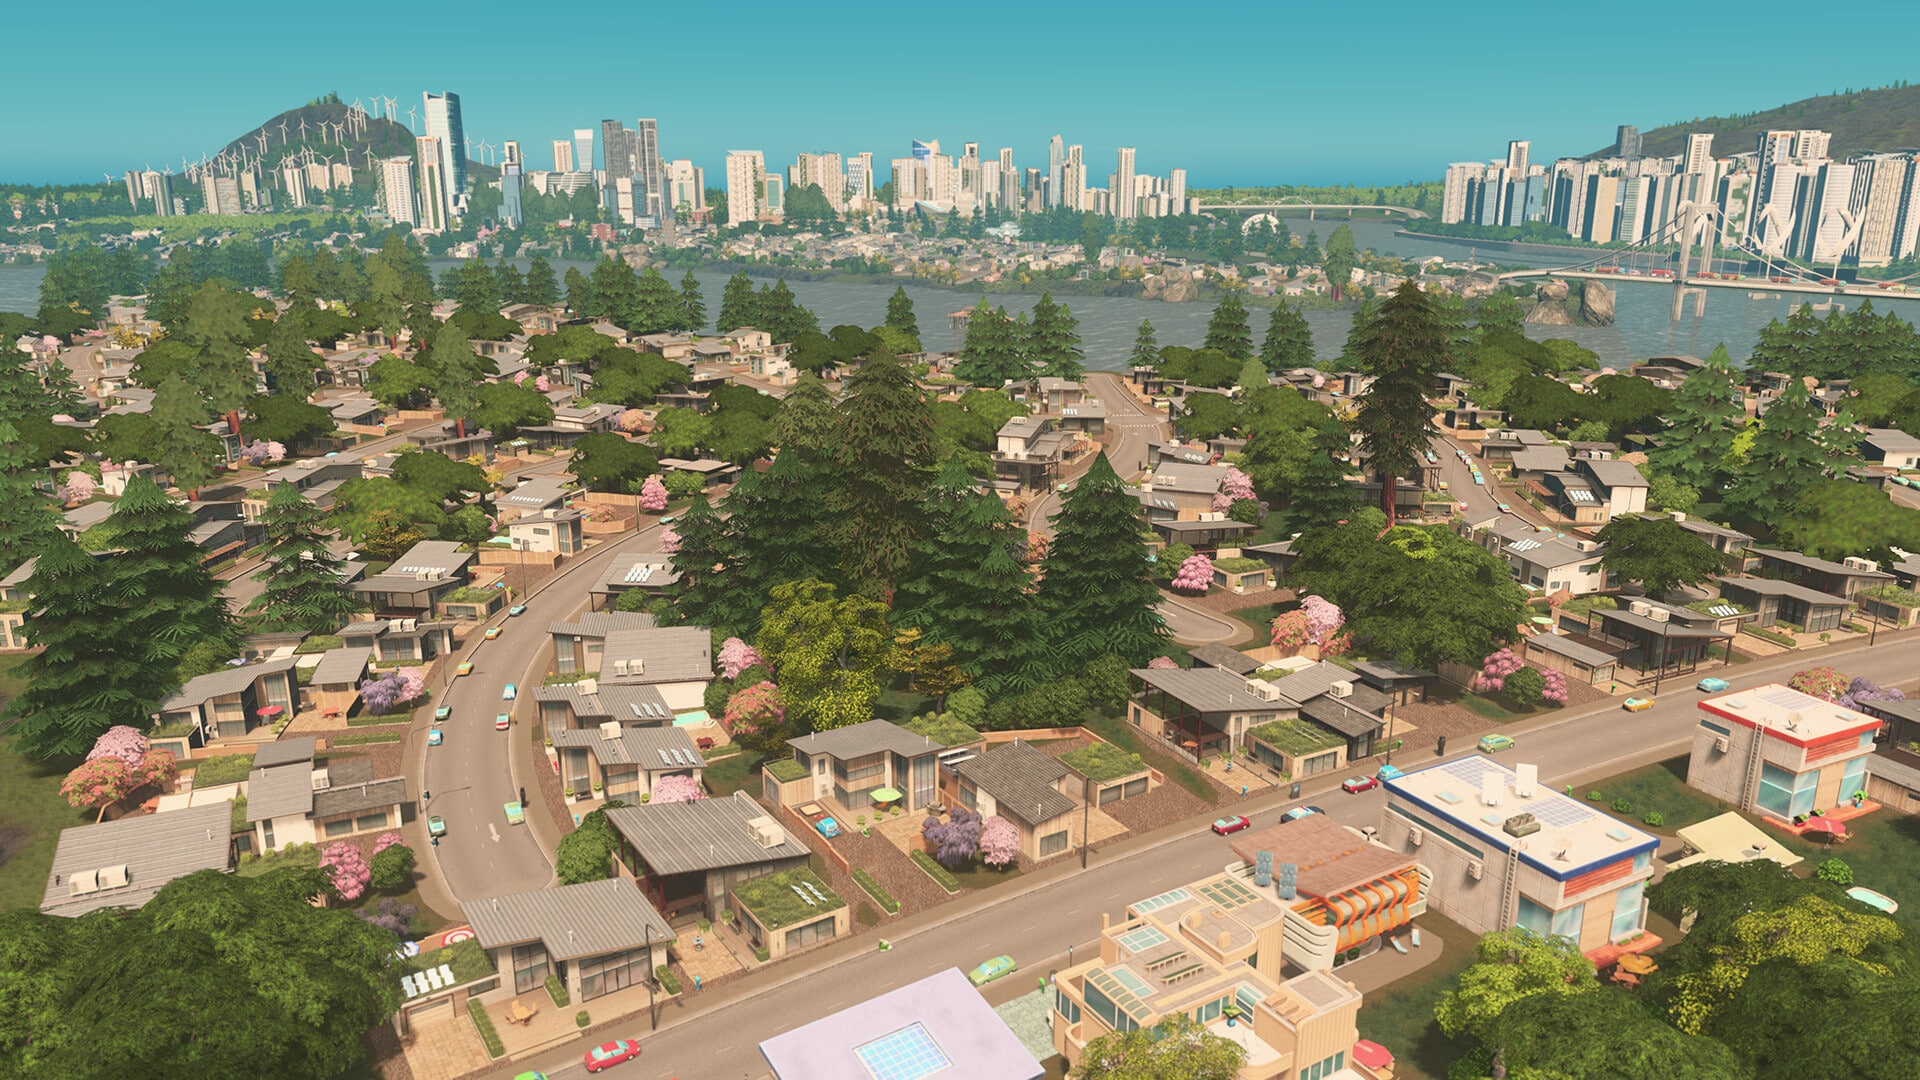 Skyline of a city in Cities: Skylines